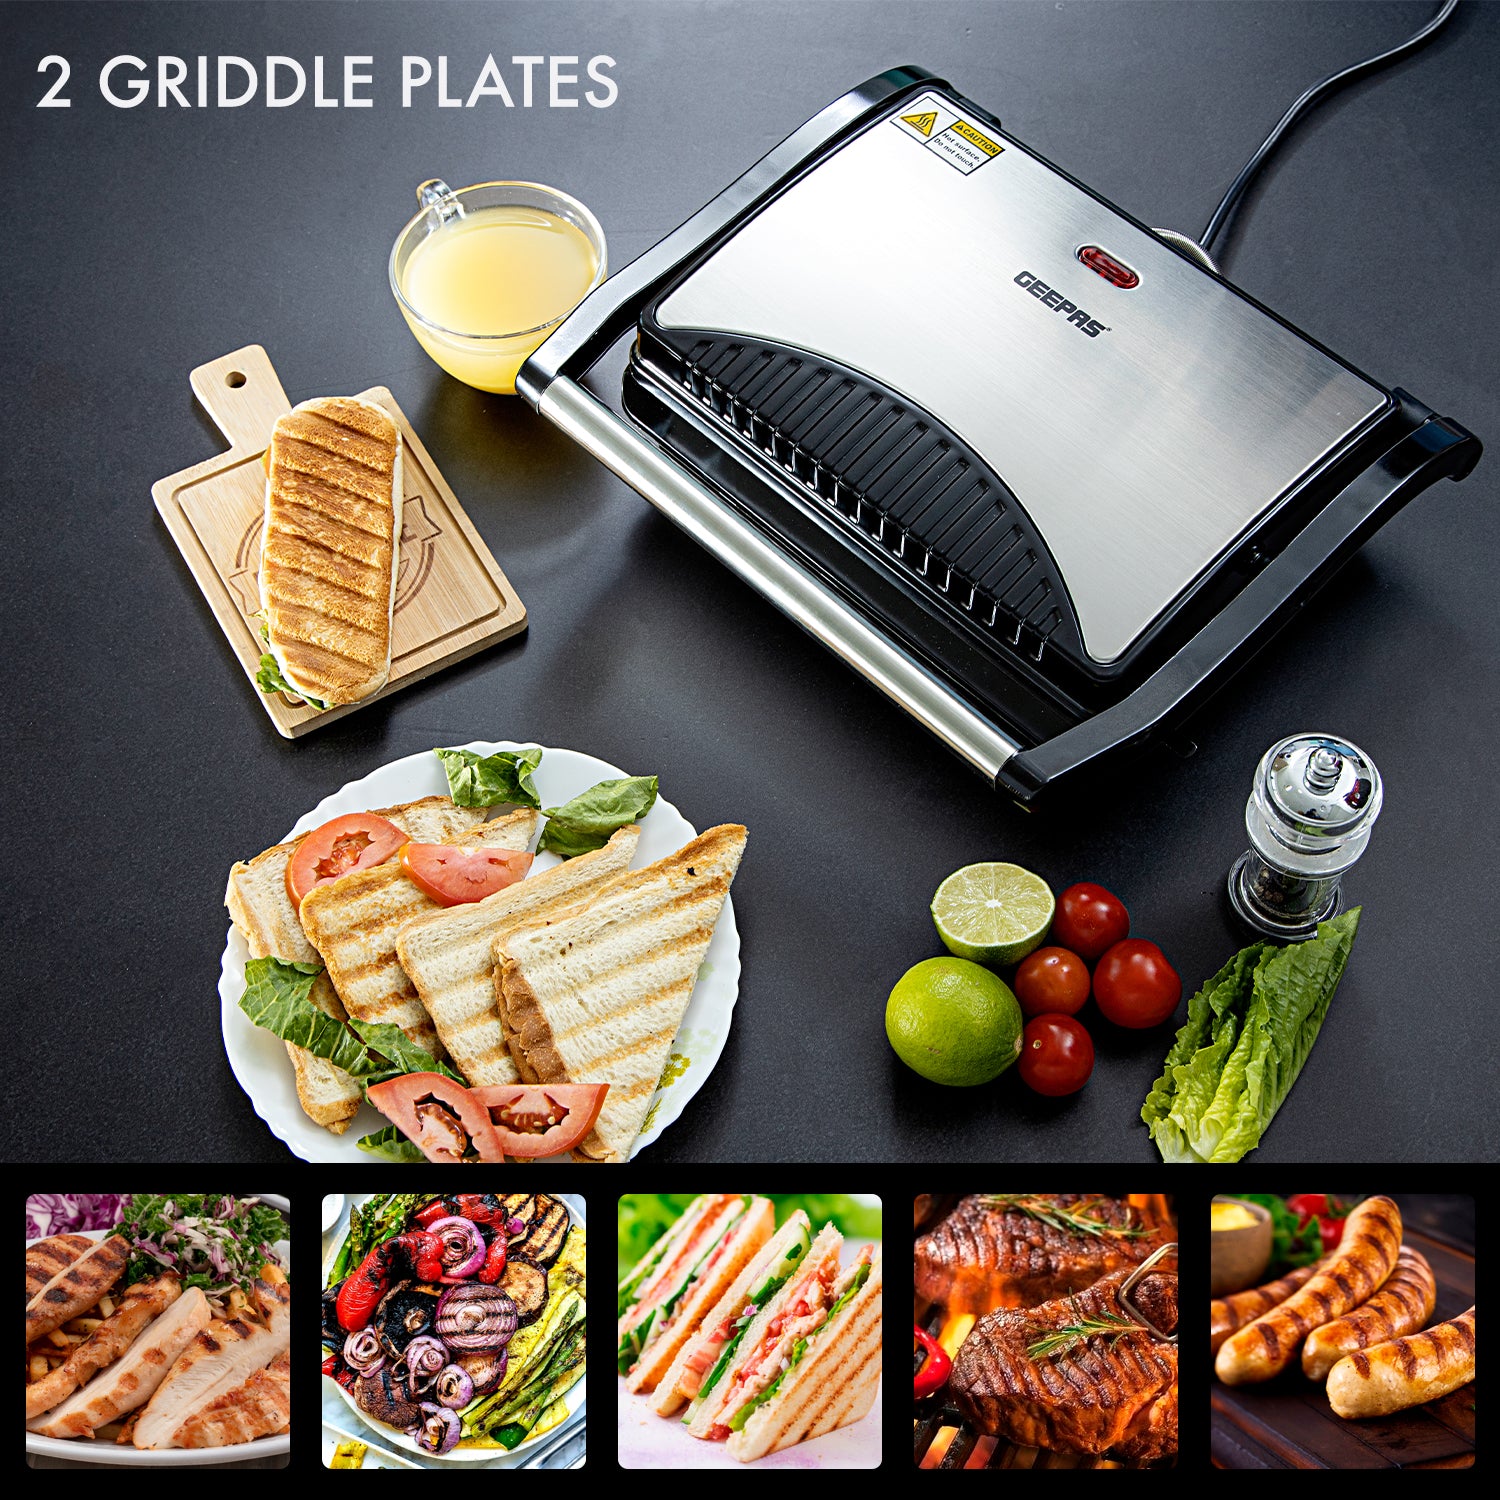 Geepas | For you. For life. Panini & Sandwich Press Toastie Maker Sandwich Maker